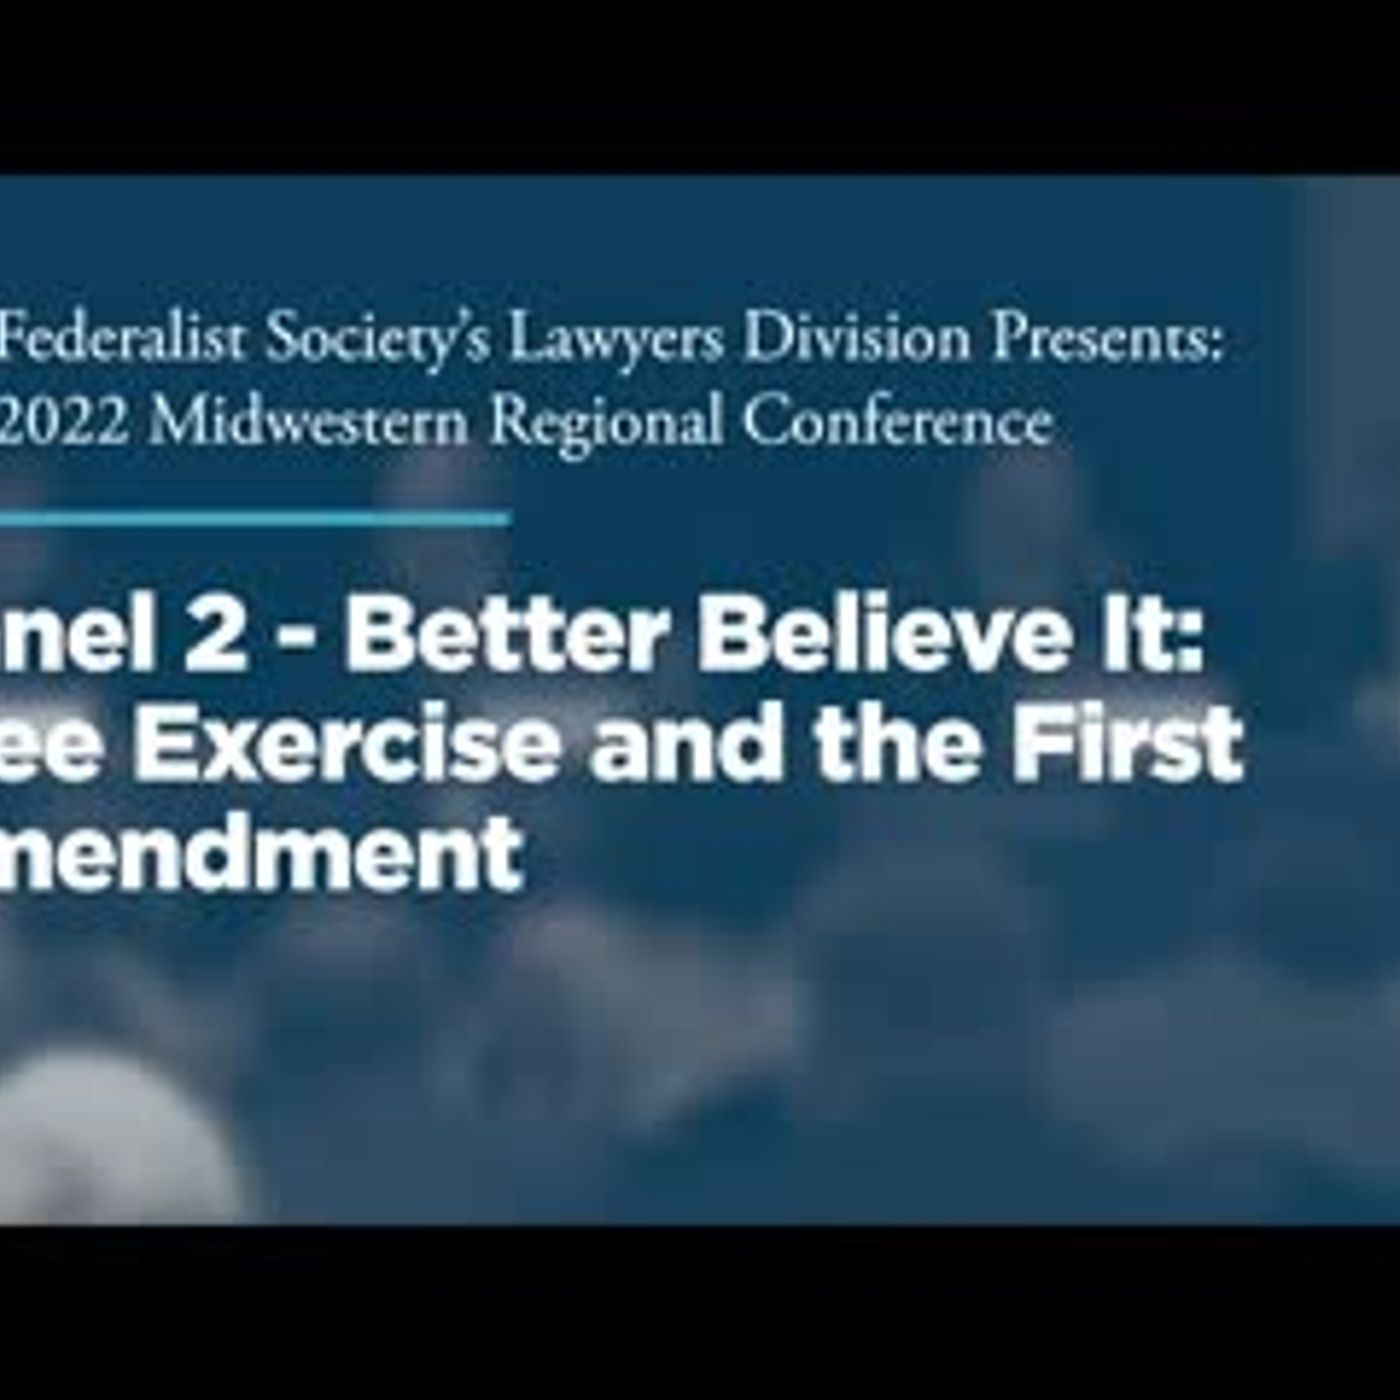 Panel 2 - Better Believe It: Free Exercise and the First Amendment